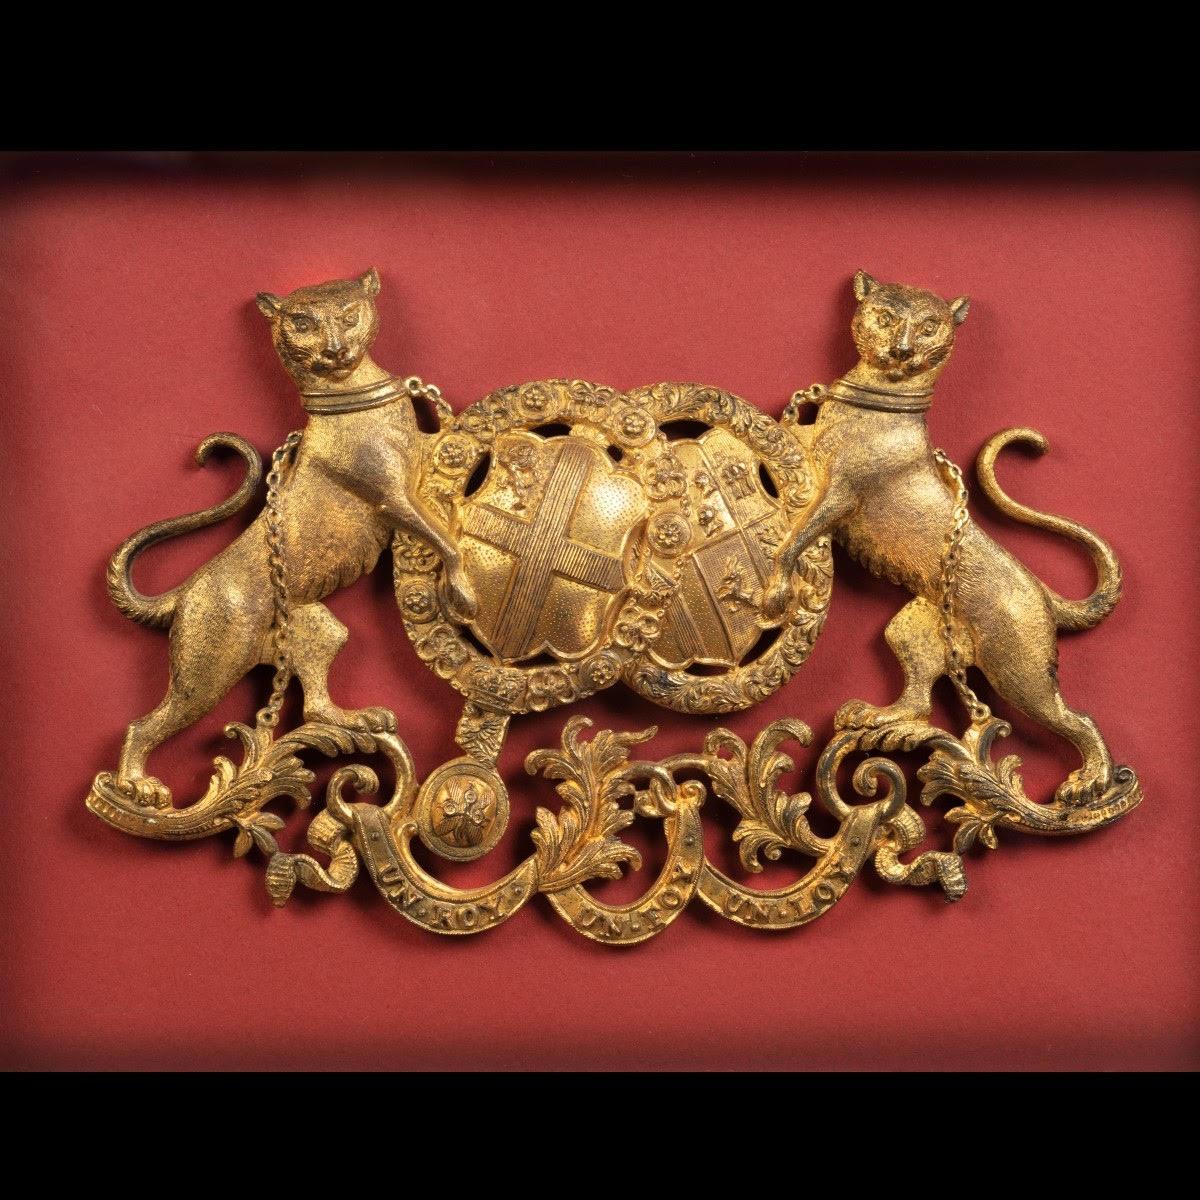 A Pair of Marquess of Clanricarde de Burgh-Canning carriage badges, each gilt metal armorial designed as the coat of arms de Burgh-Canning for Ullick John de Burgh, 1st Marquess of Clanricade (1802-1874) created Knight of St Patrick in 1831,